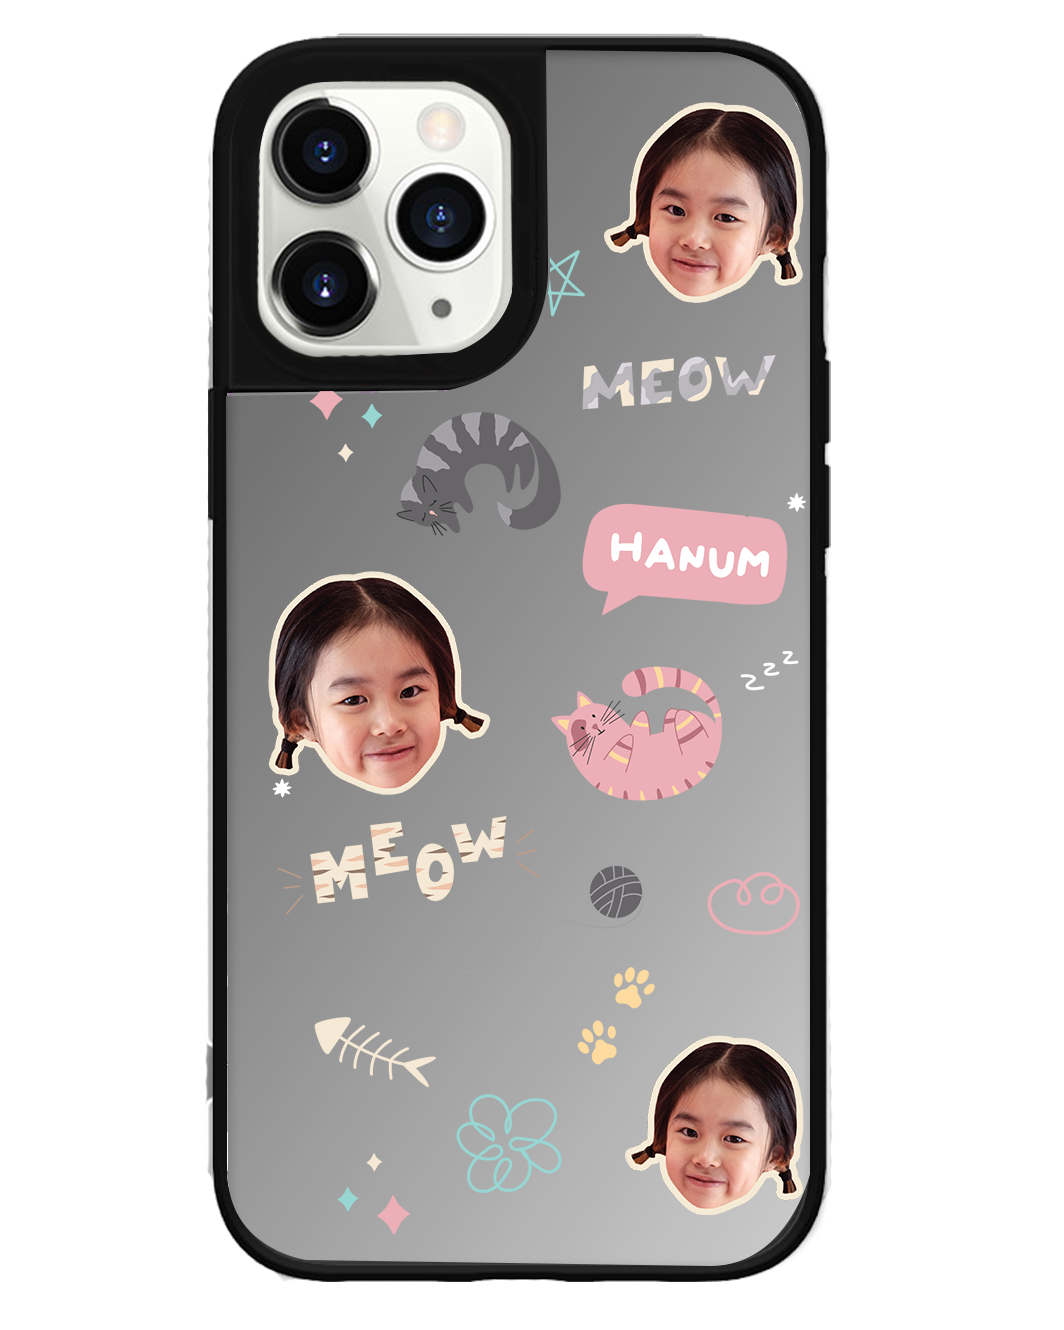 iPhone Mirror Grip Case - Face Grid Kitty